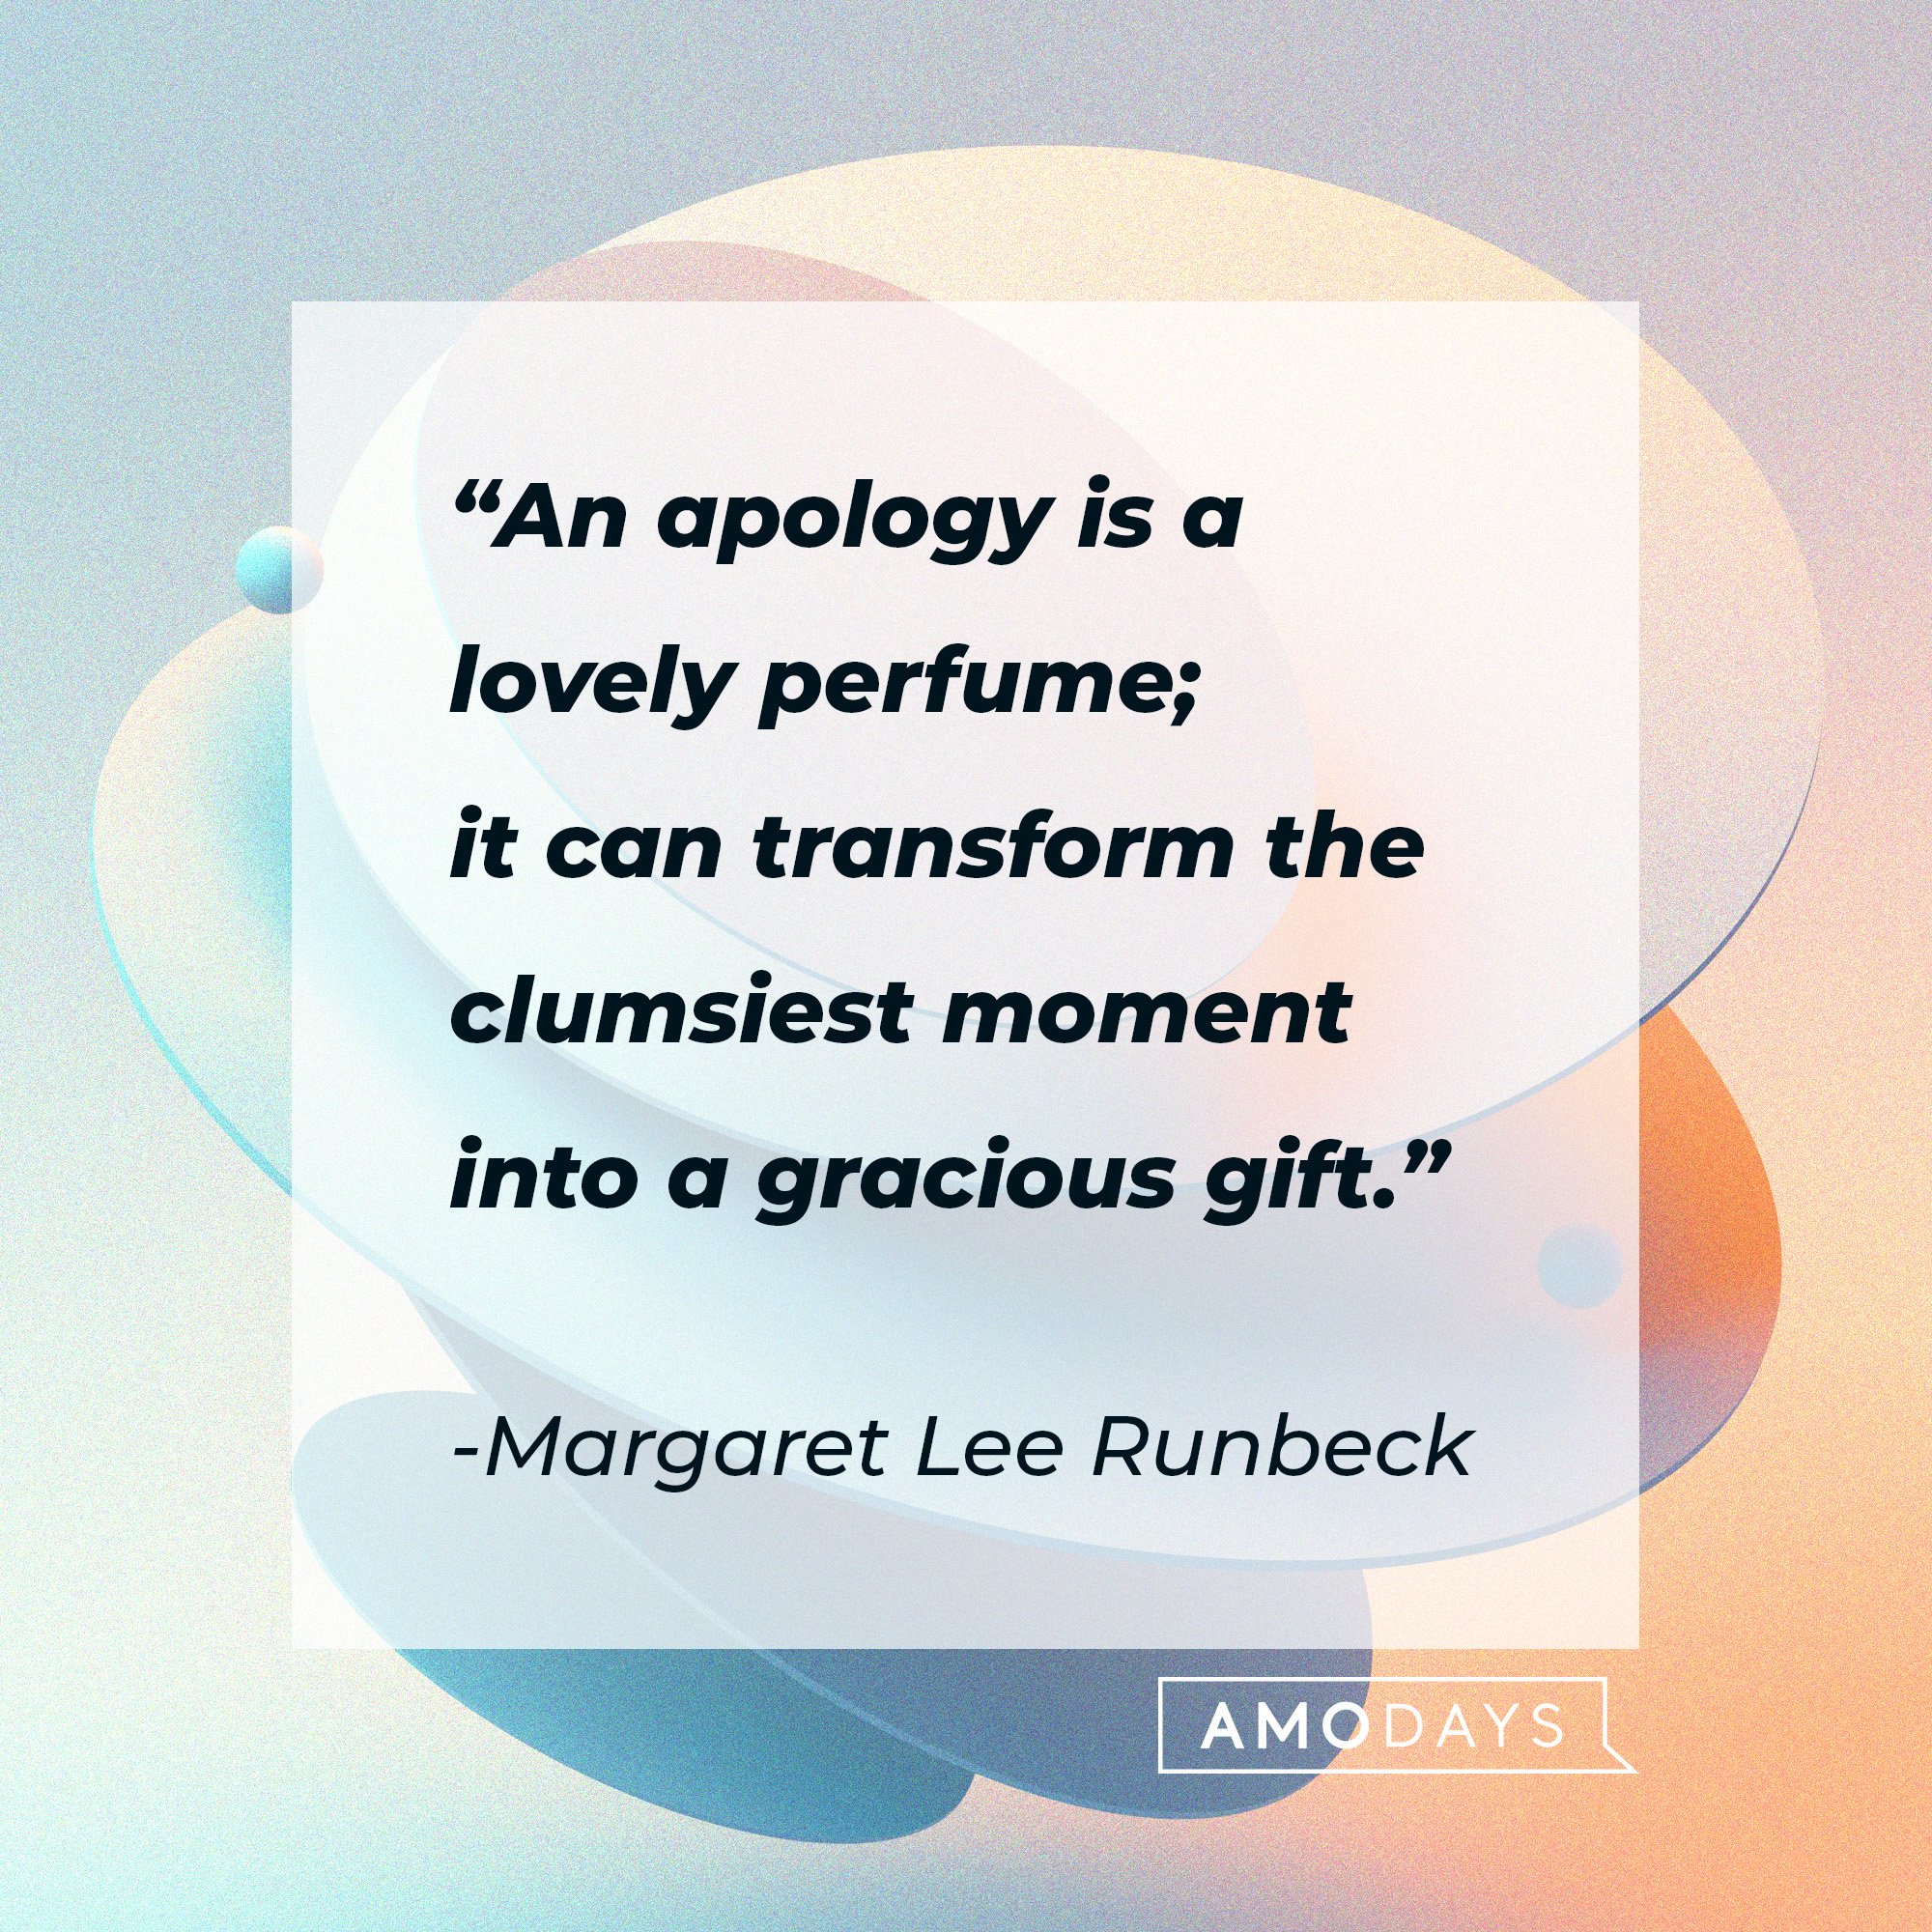 Margaret Lee Runbeck: “An apology is a lovely perfume; it can transform the clumsiest moment into a gracious gift.” | Image: AmoDays